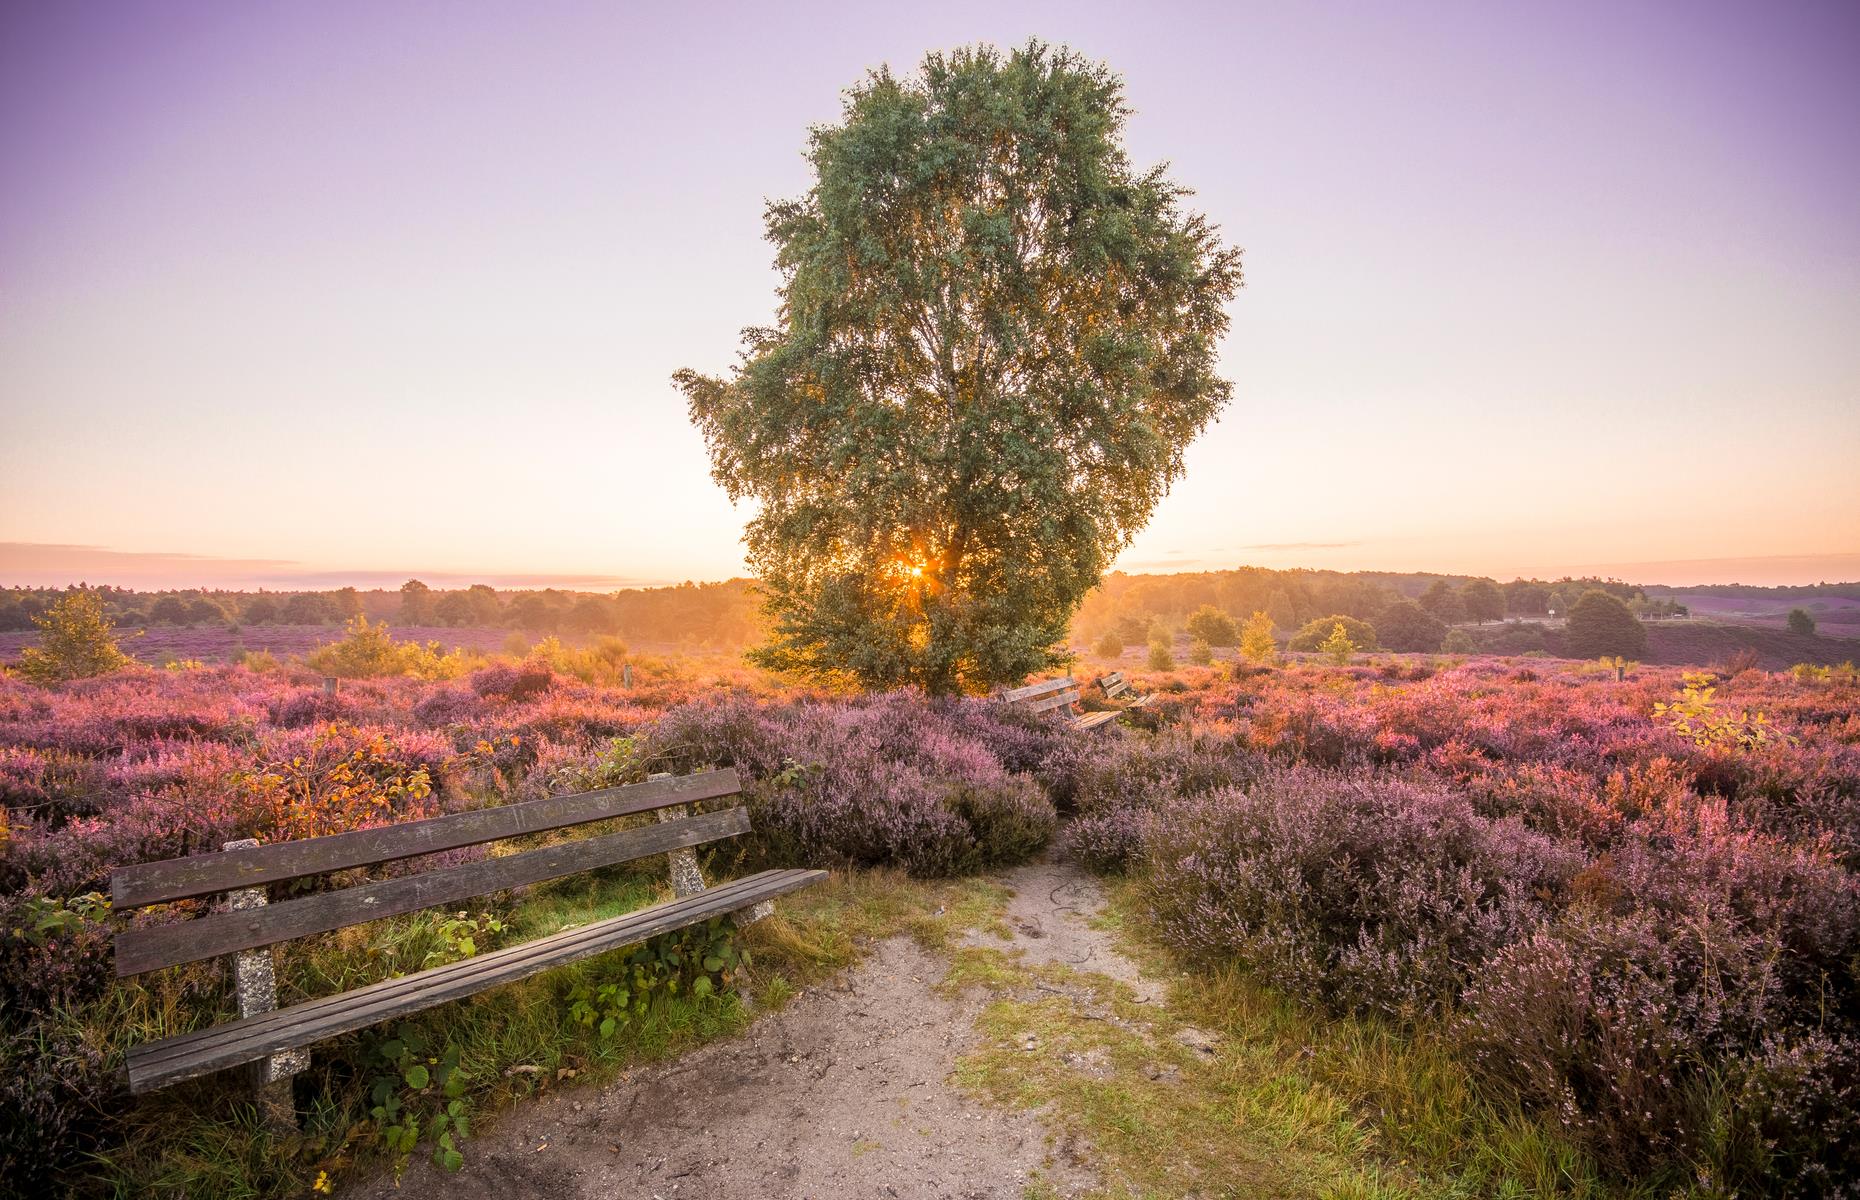 <p>One of 20 national parks in the Netherlands, Hoge Veluwe is one of the oldest, having been established in 1935. Measuring 21 square miles (54sq km), it has some of the most diverse landscapes of any park on this list. Think heather-strewn heathland, dense forests, peat bogs and gentle rolling sand dunes. It’s found in the center of the country, an hour’s drive from Amsterdam. Meanwhile, Apeldoorn is just 19 minutes by car. </p>